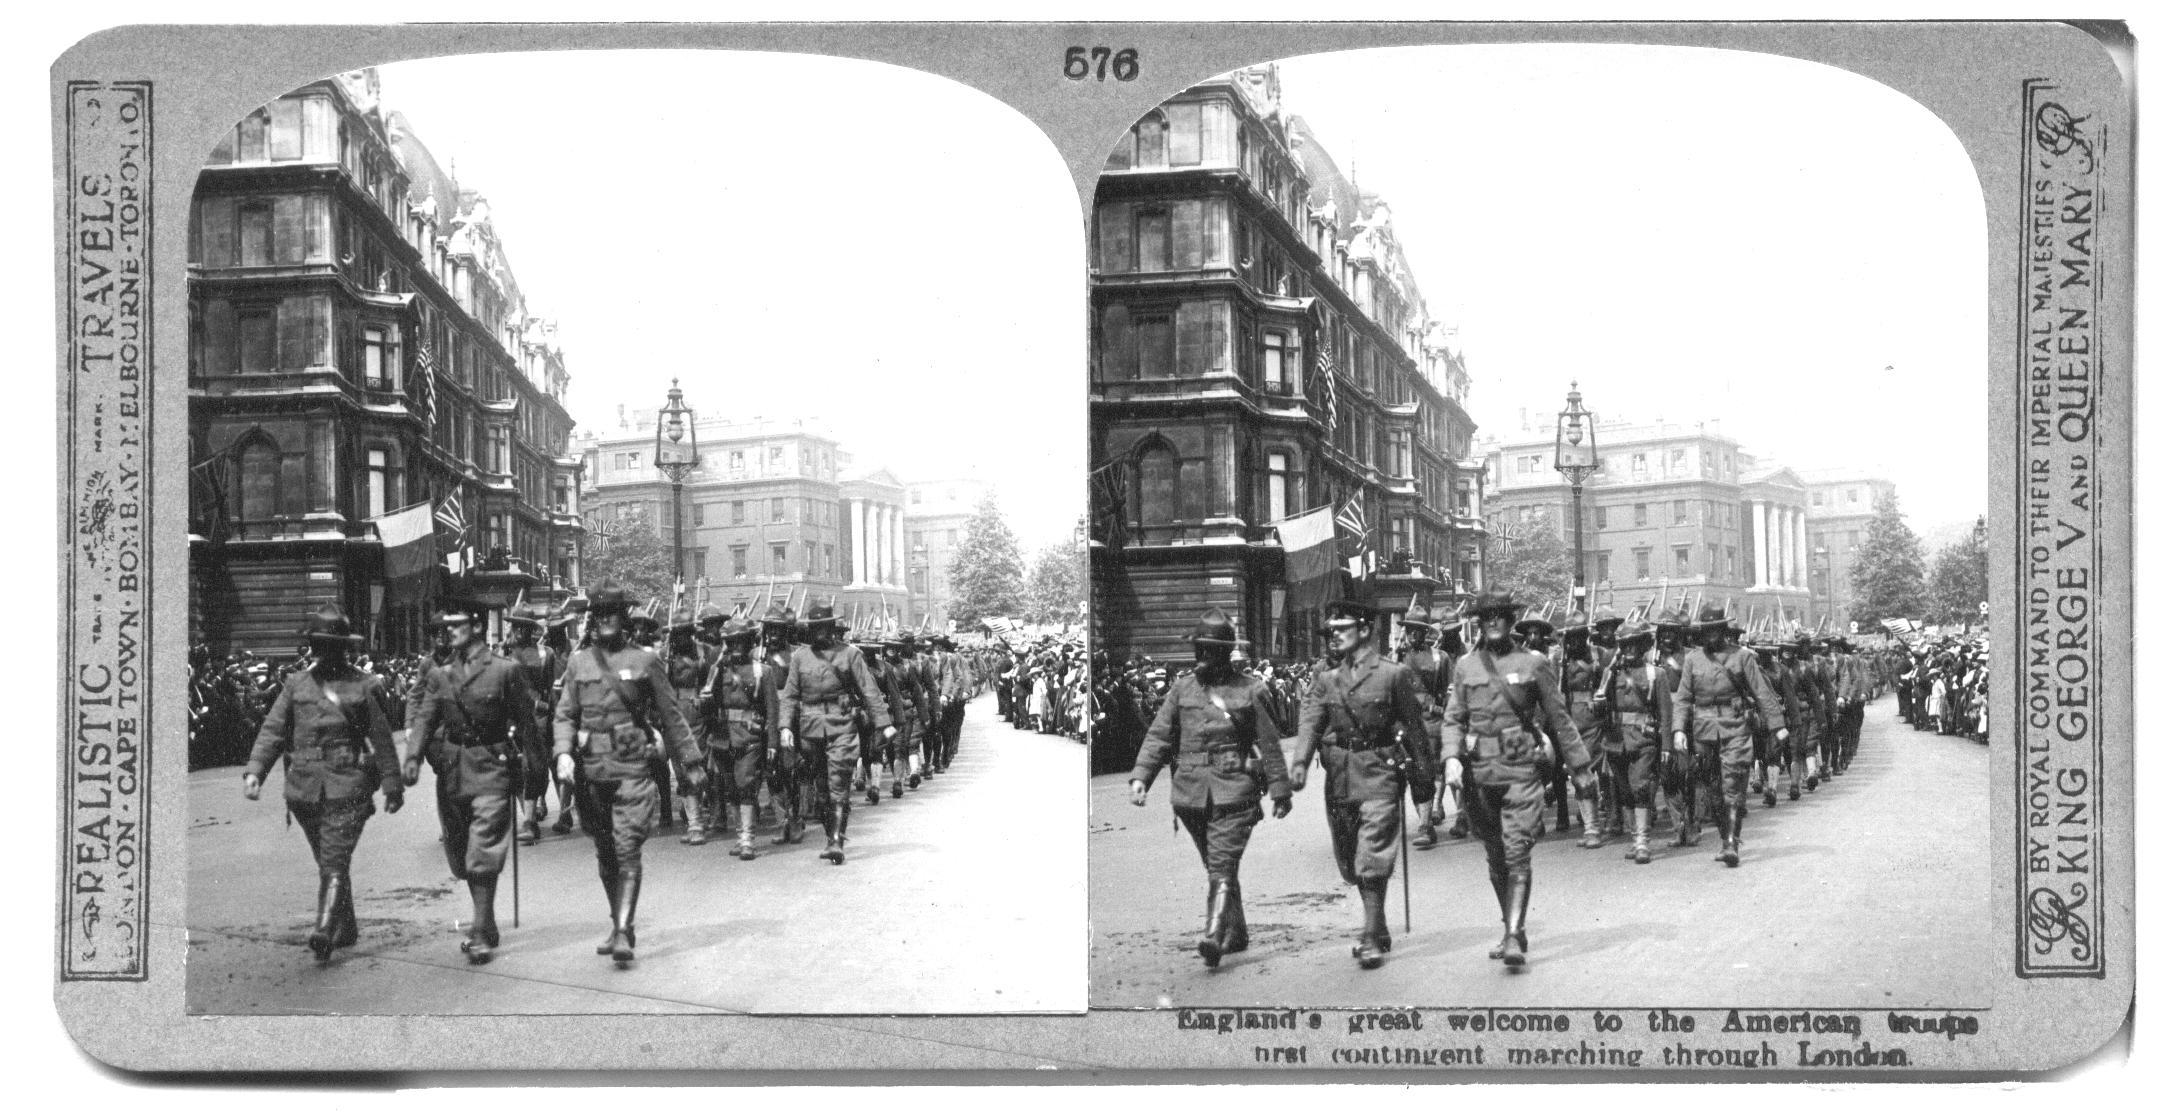 England's great welcome to the American troops first contingent marching through London